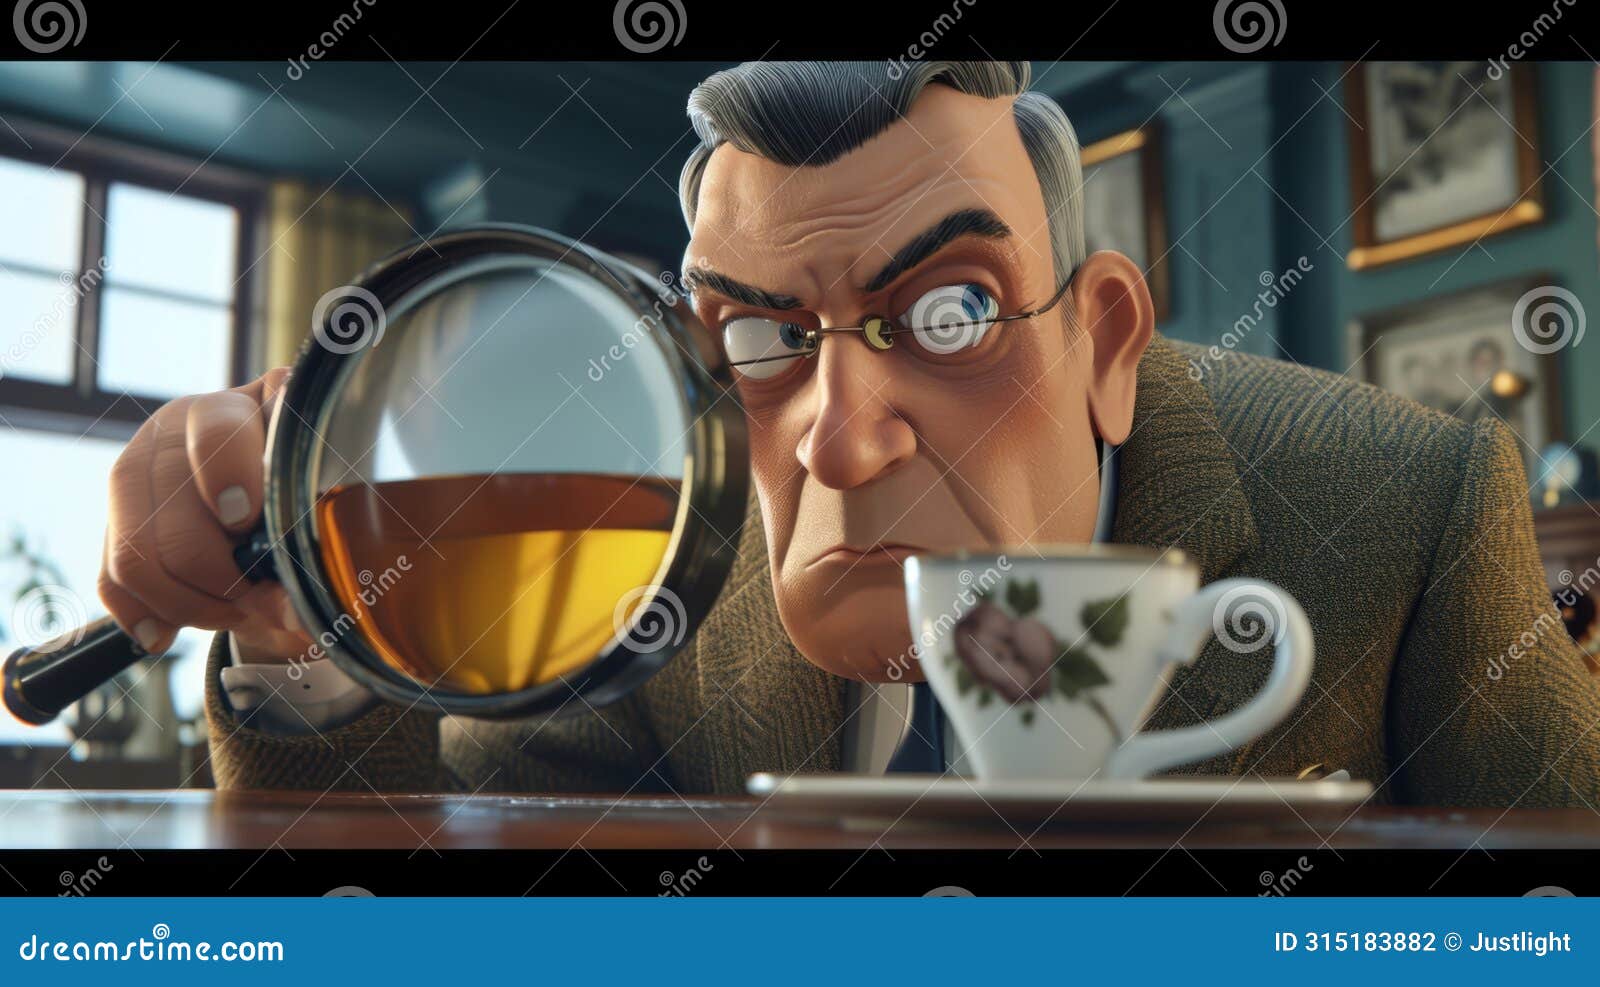 a magnifying gl holding a mug of tea trying to decipher a cryptic clue while his colleagues jealously eye his break time